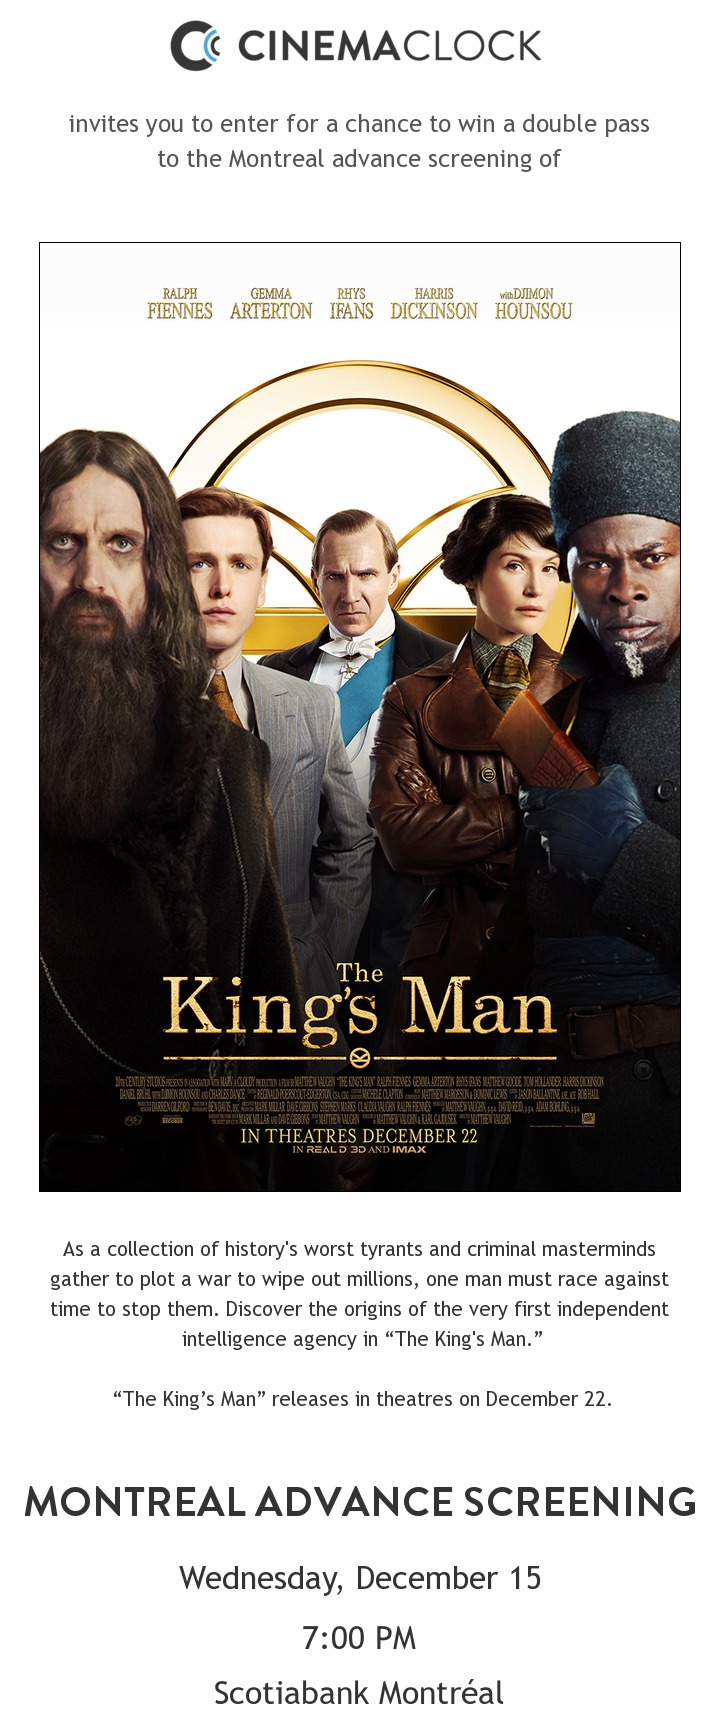 Promotion: The King's Man